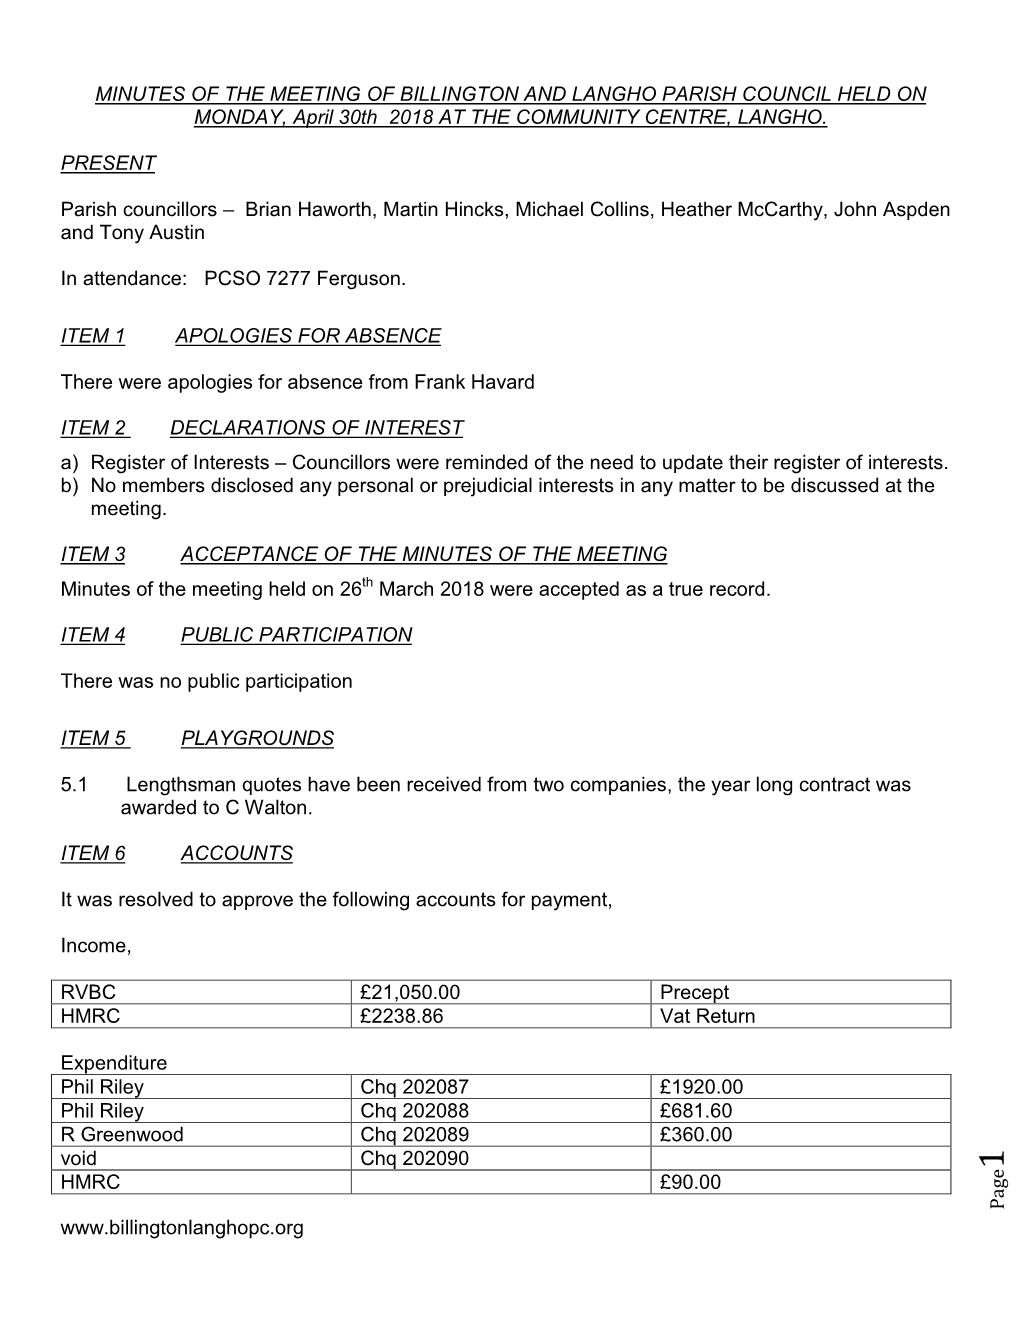 Minutes of the Meetingof Billington and Langho Parish Council Held on November 2002 at the Community Centre, Langho